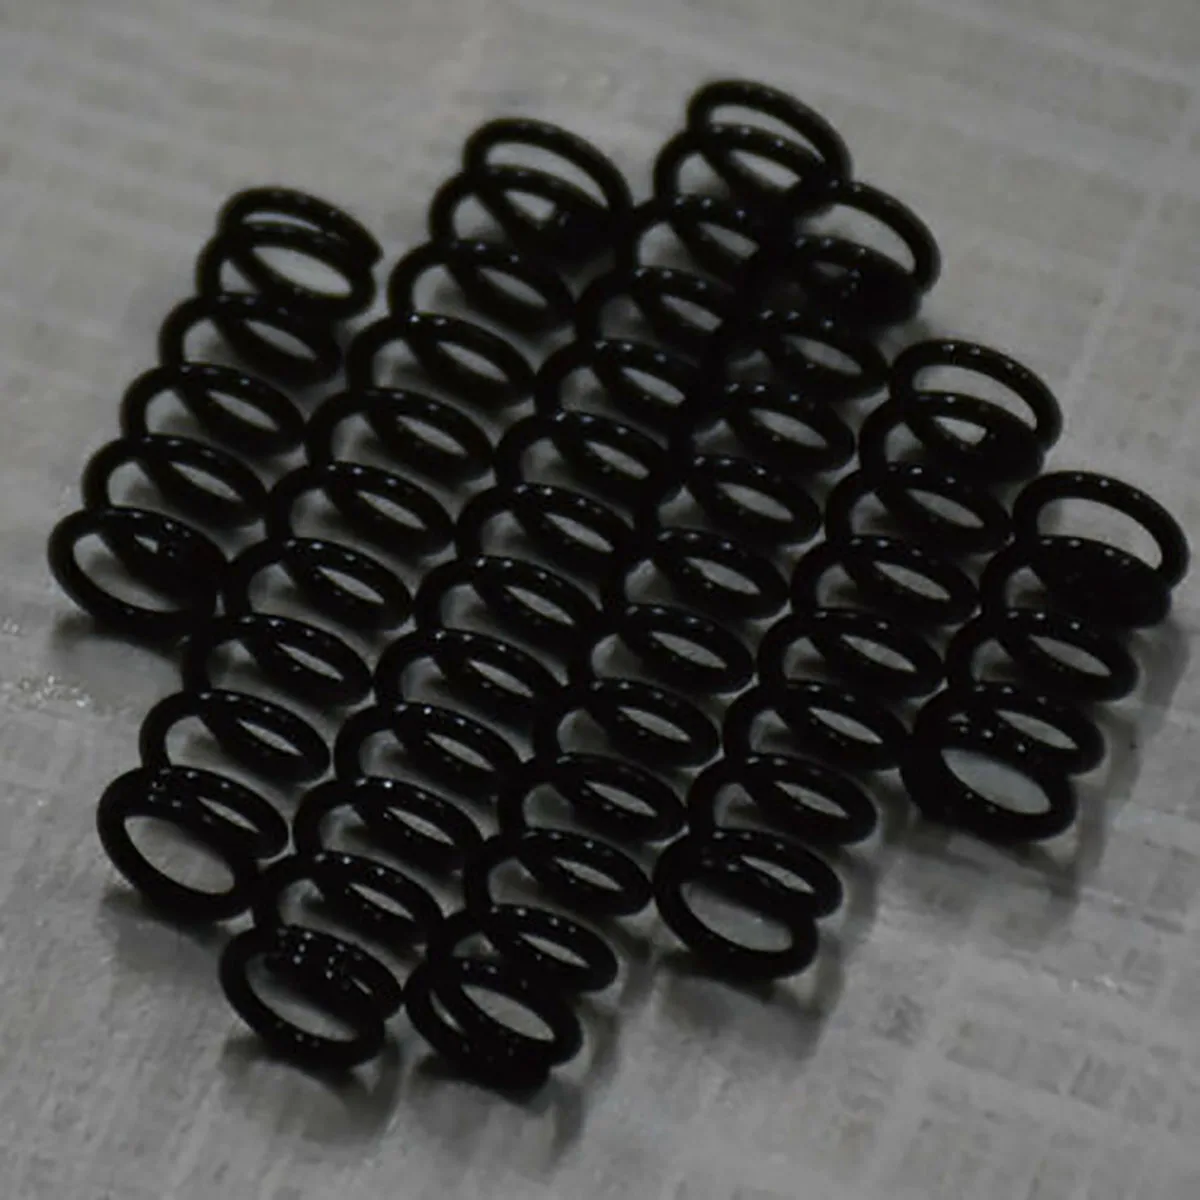 

10Pcs Wire Dia 1.2mm Black Y-type Compression Spring 65Mn Steel Spiral Pressure Spring Length 10mm to 50mm Outer Dia 6mm - 20mm